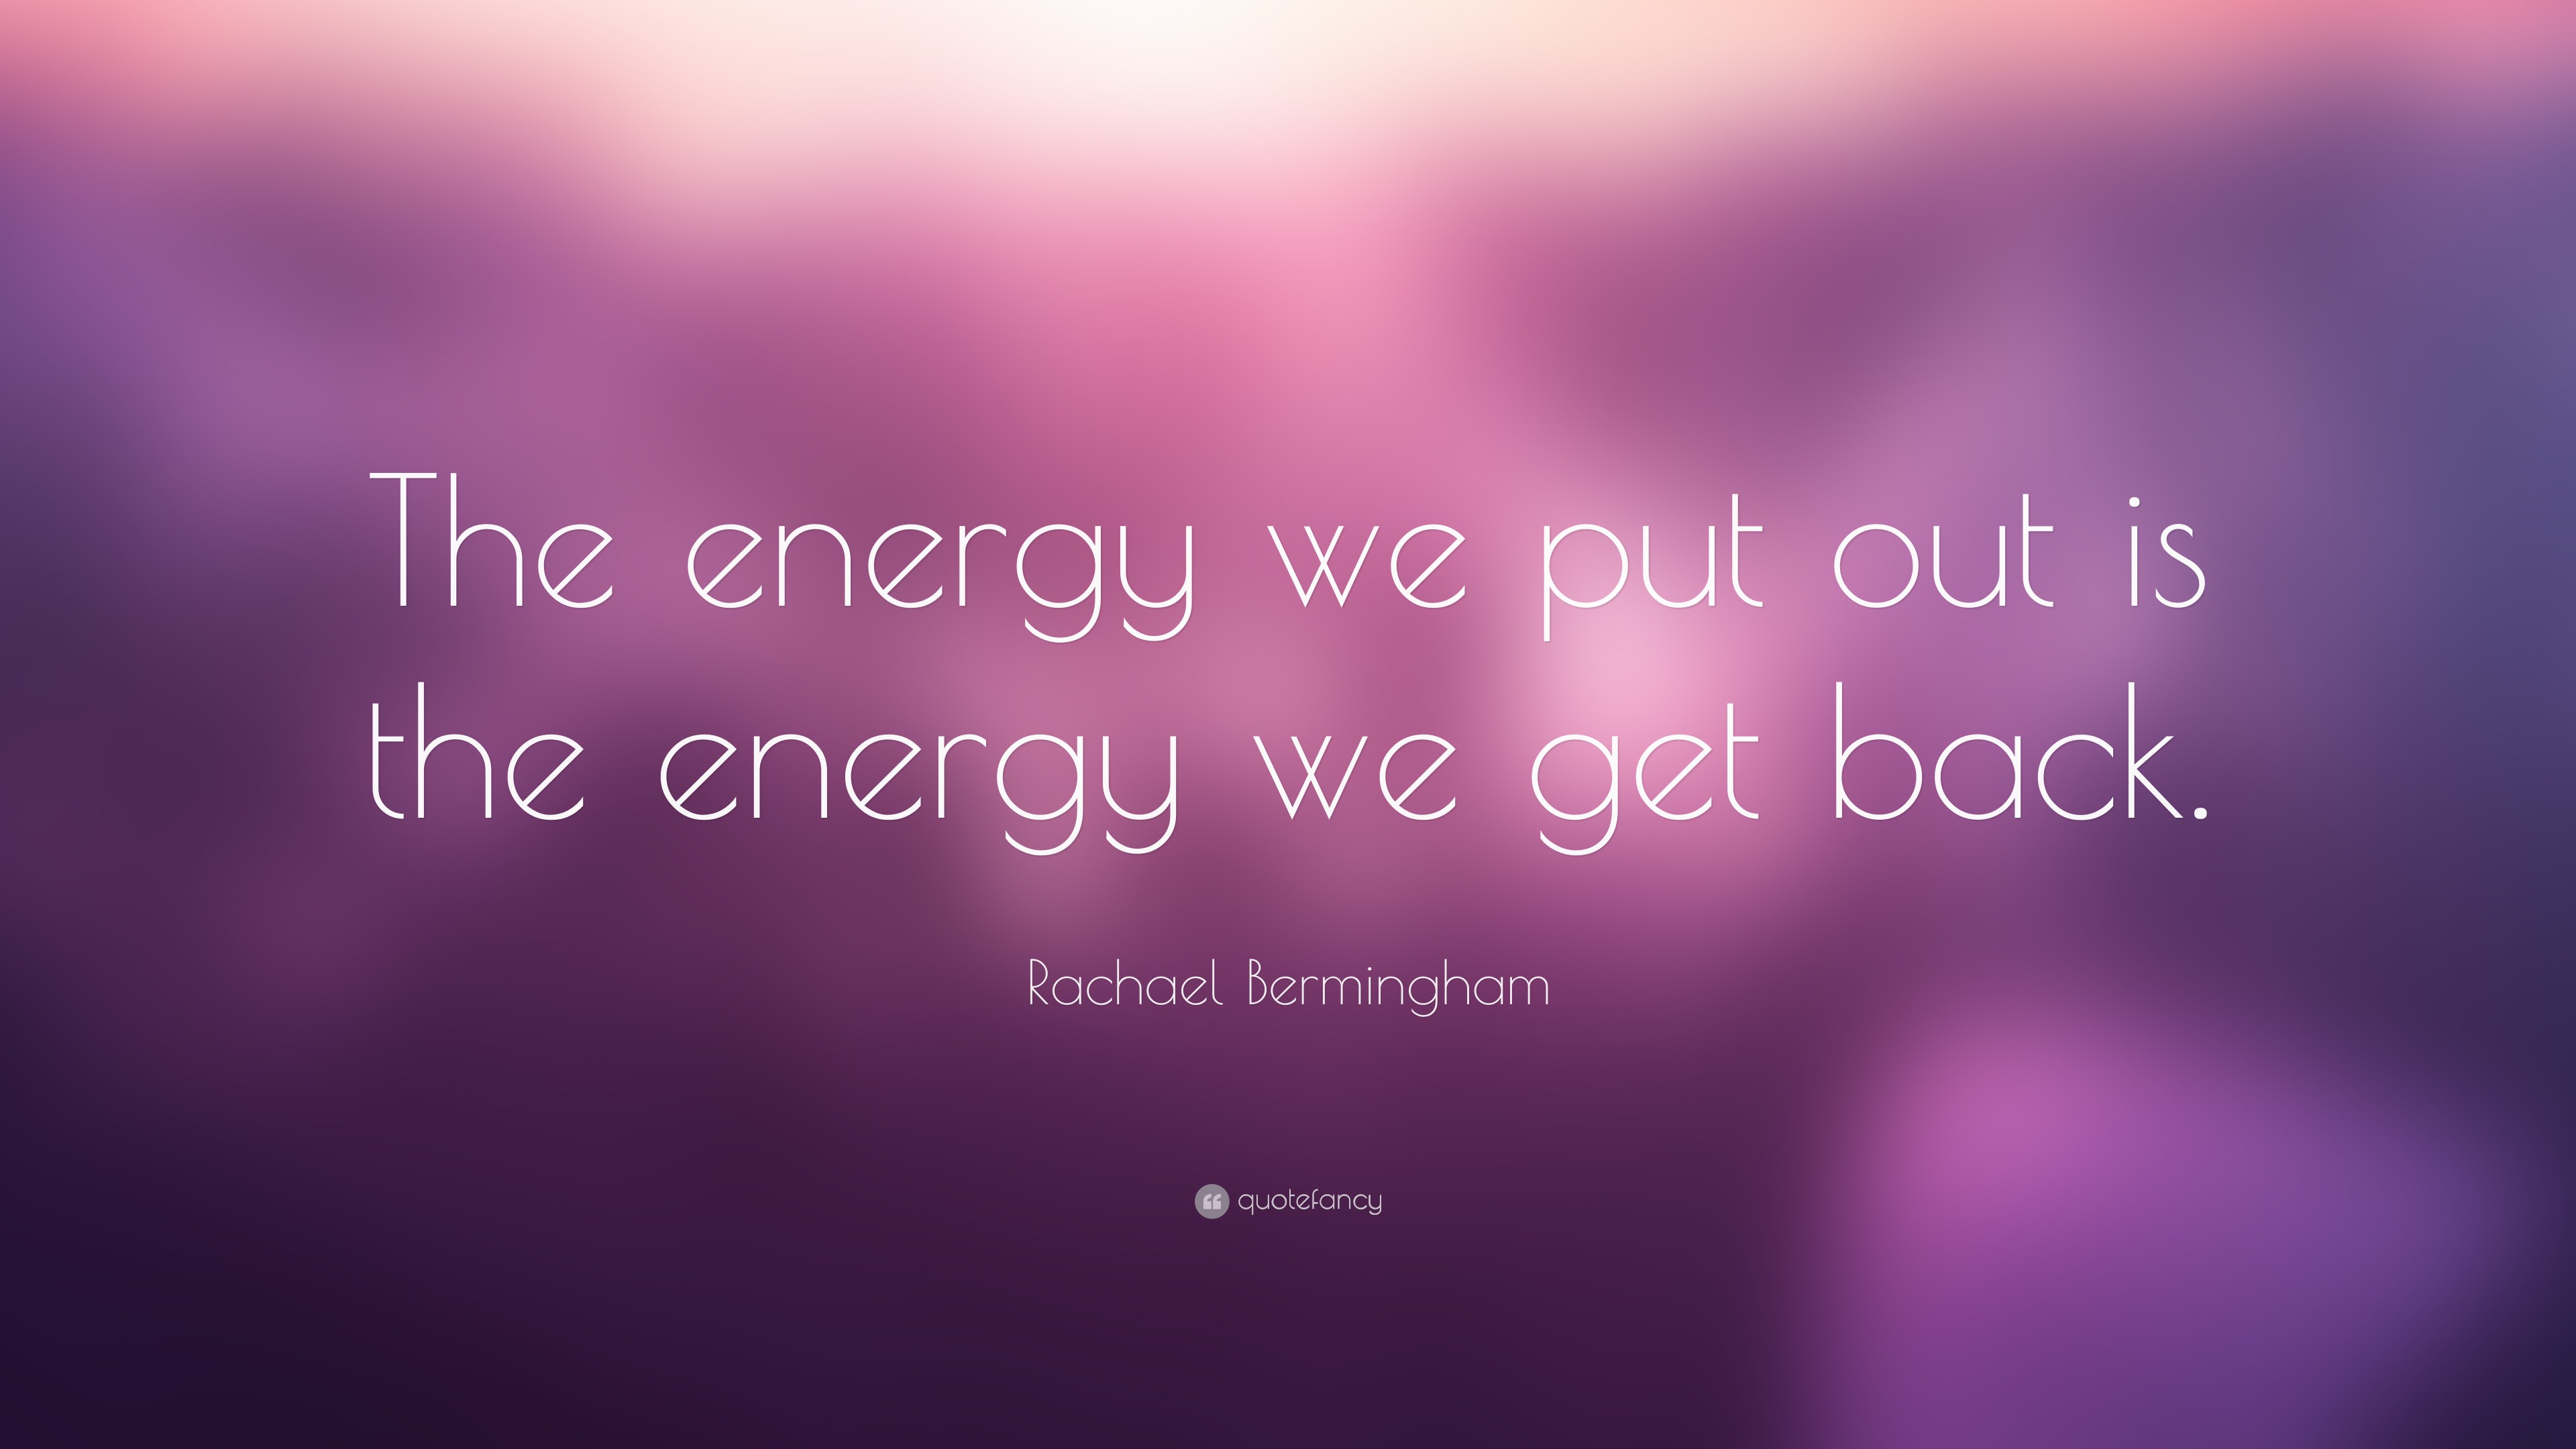 Rachael Bermingham Quote: “The energy we put out is the energy we get ...